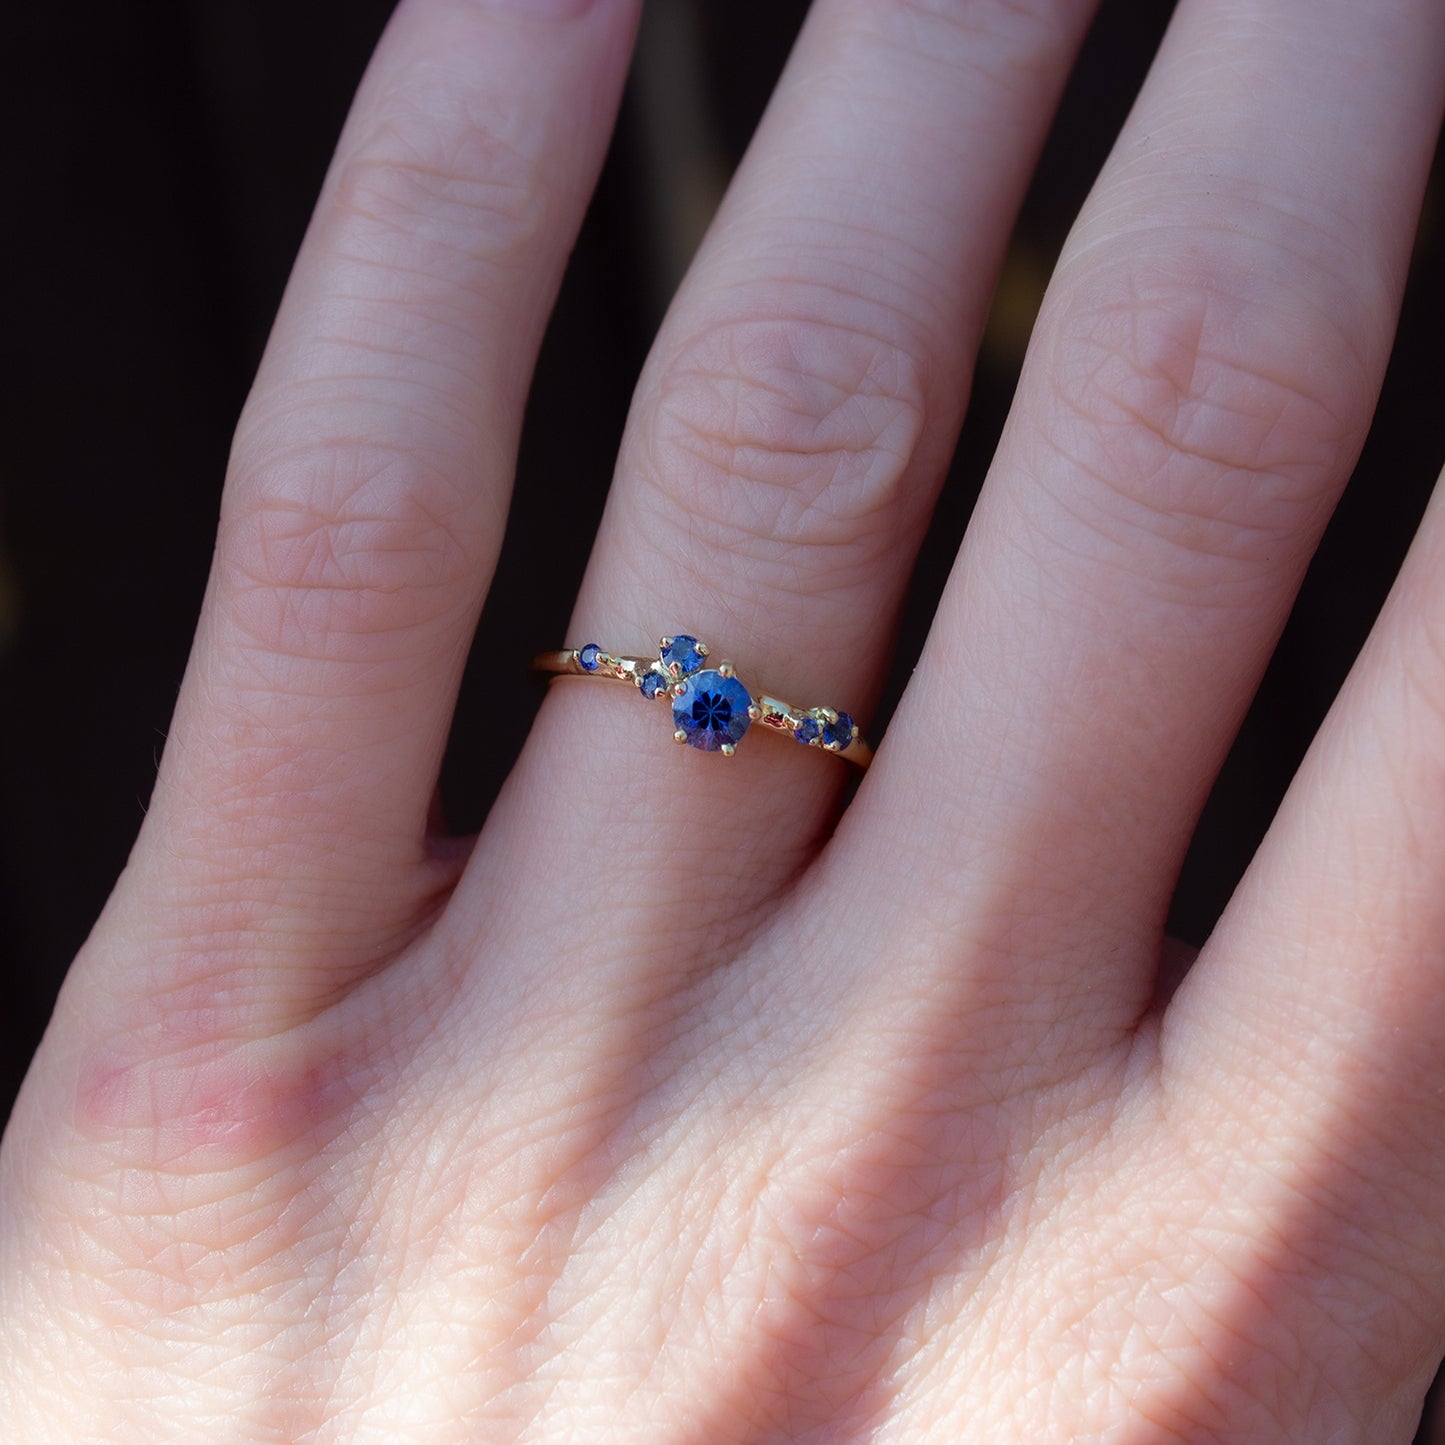 Beautful, delicate ring glimmering with cornflower blue sapphires gently scattered along the band.